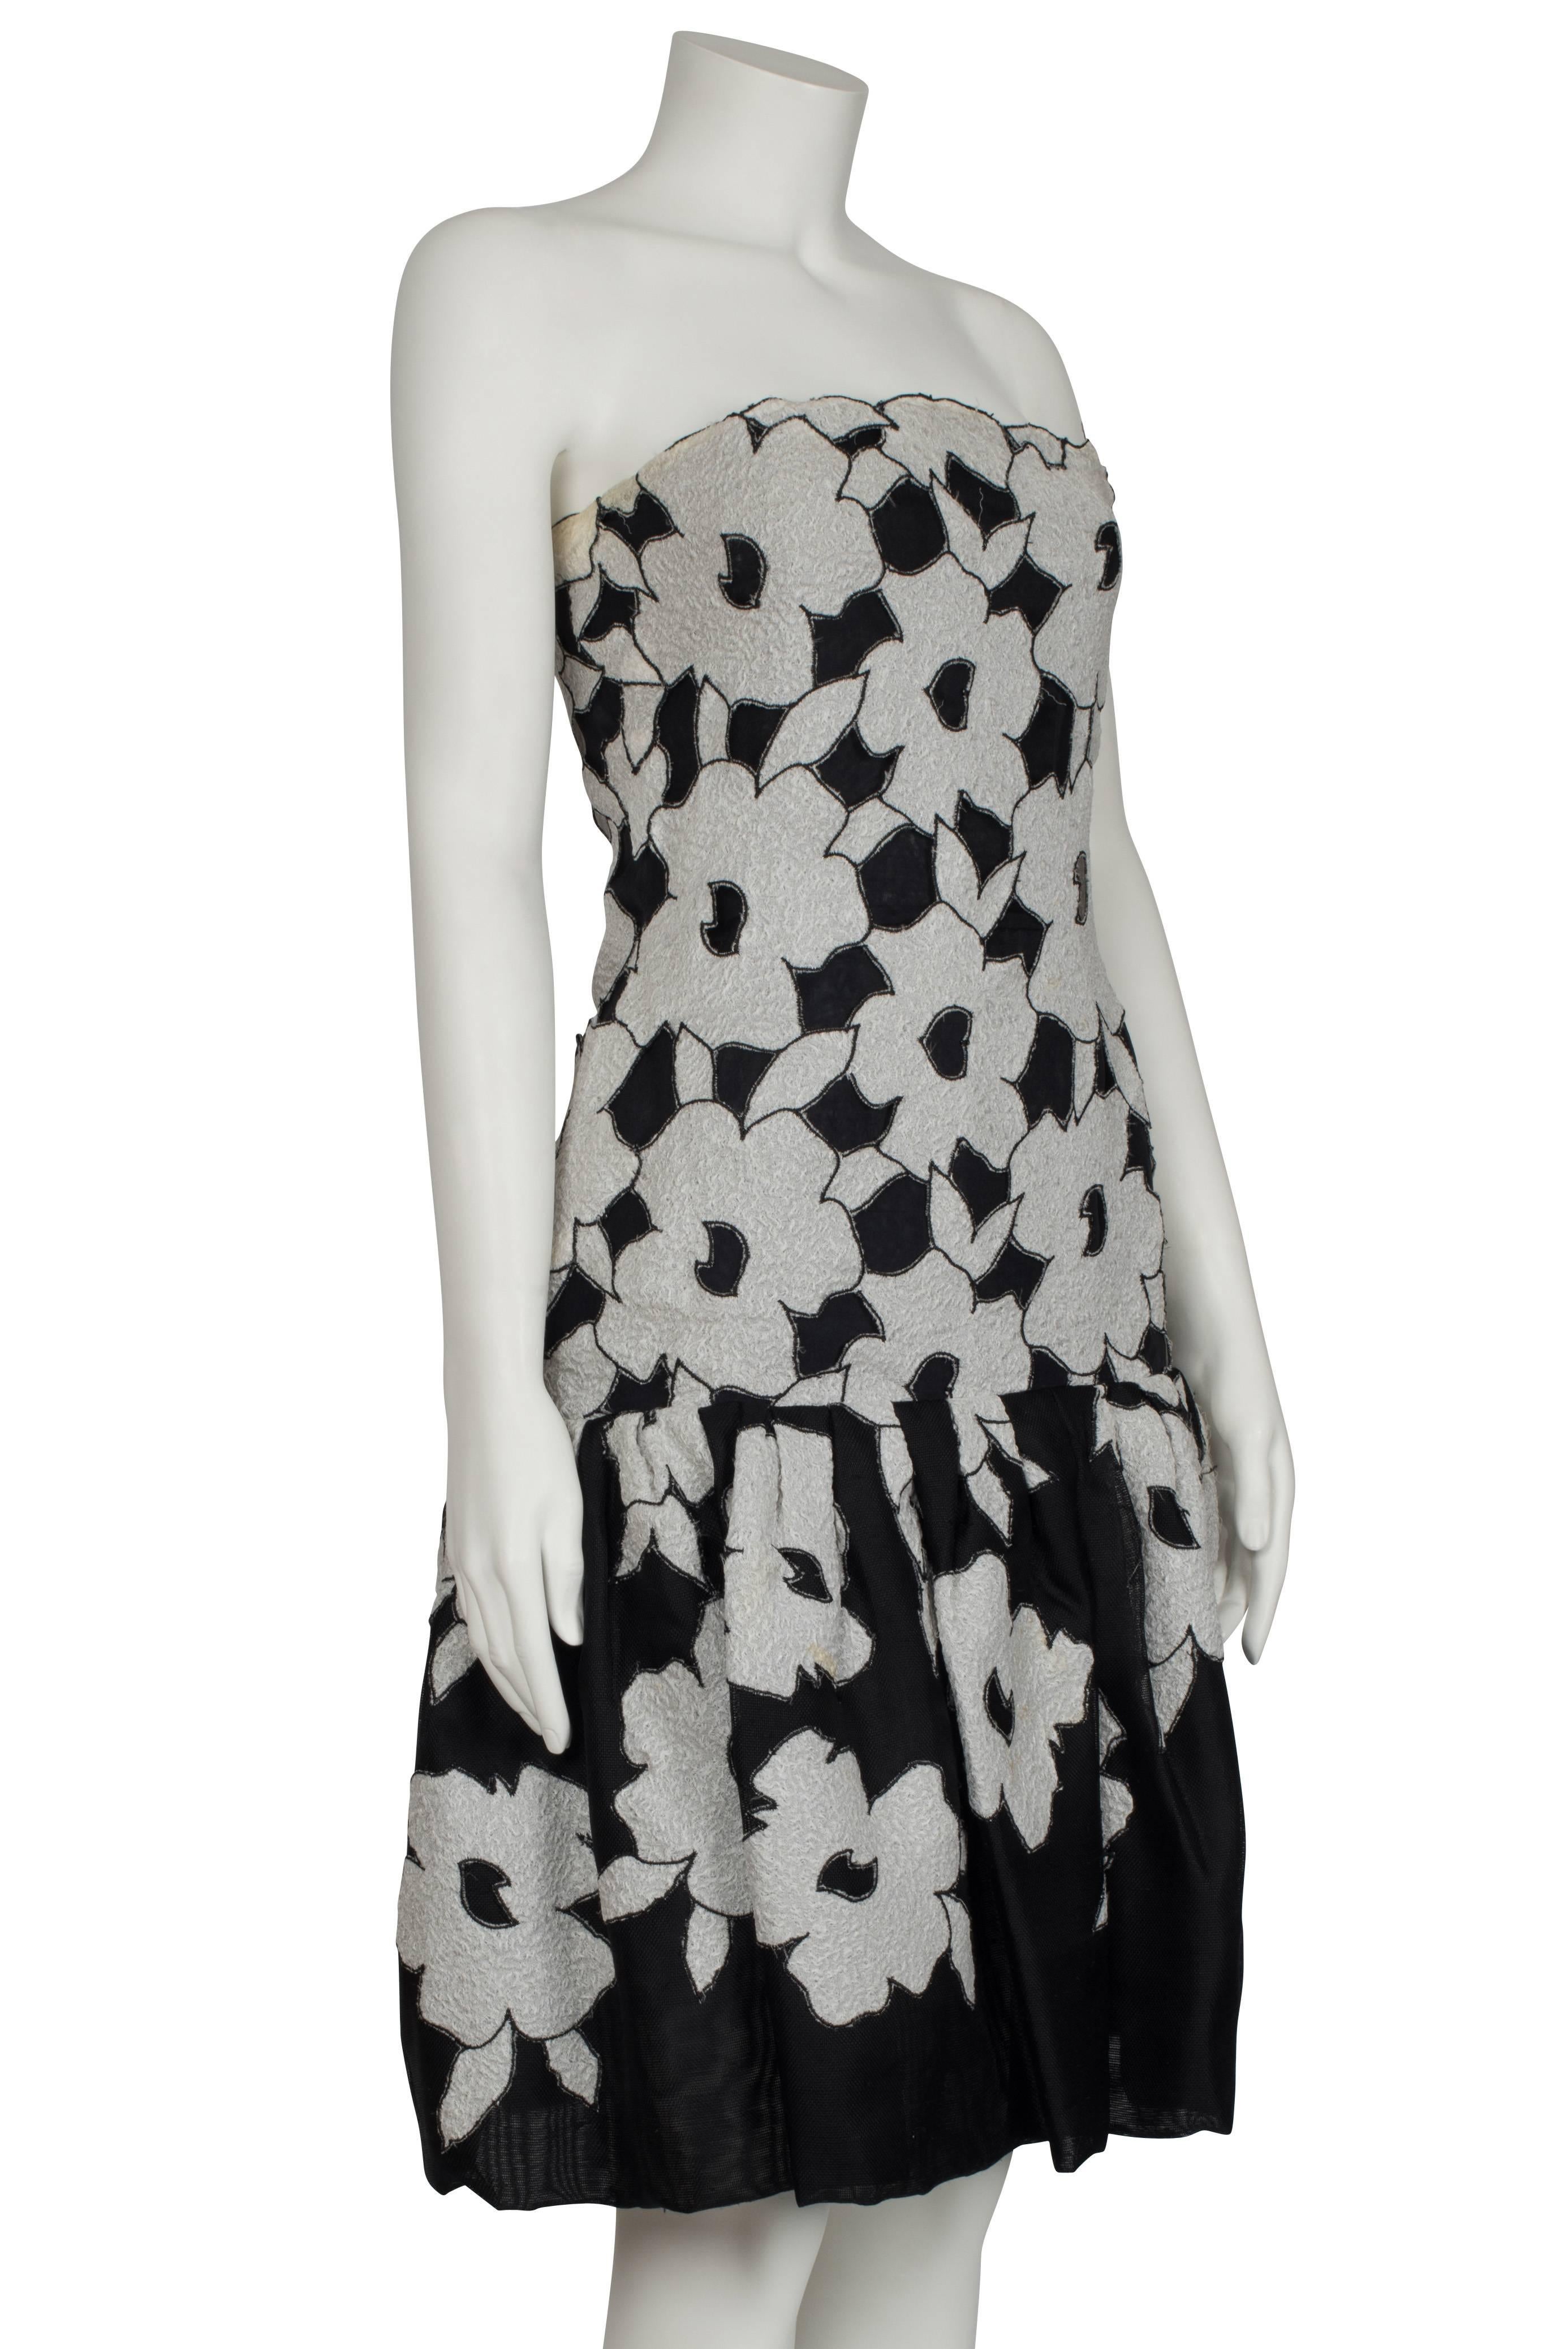 An elegant Christian Dior couture monochrome silk bandeau cocktail dress from the Spring/Summer 1983 collection. The strapless structured bodice is constructed from black silk with an overlay of textured white silk appliqued flowers. The dress